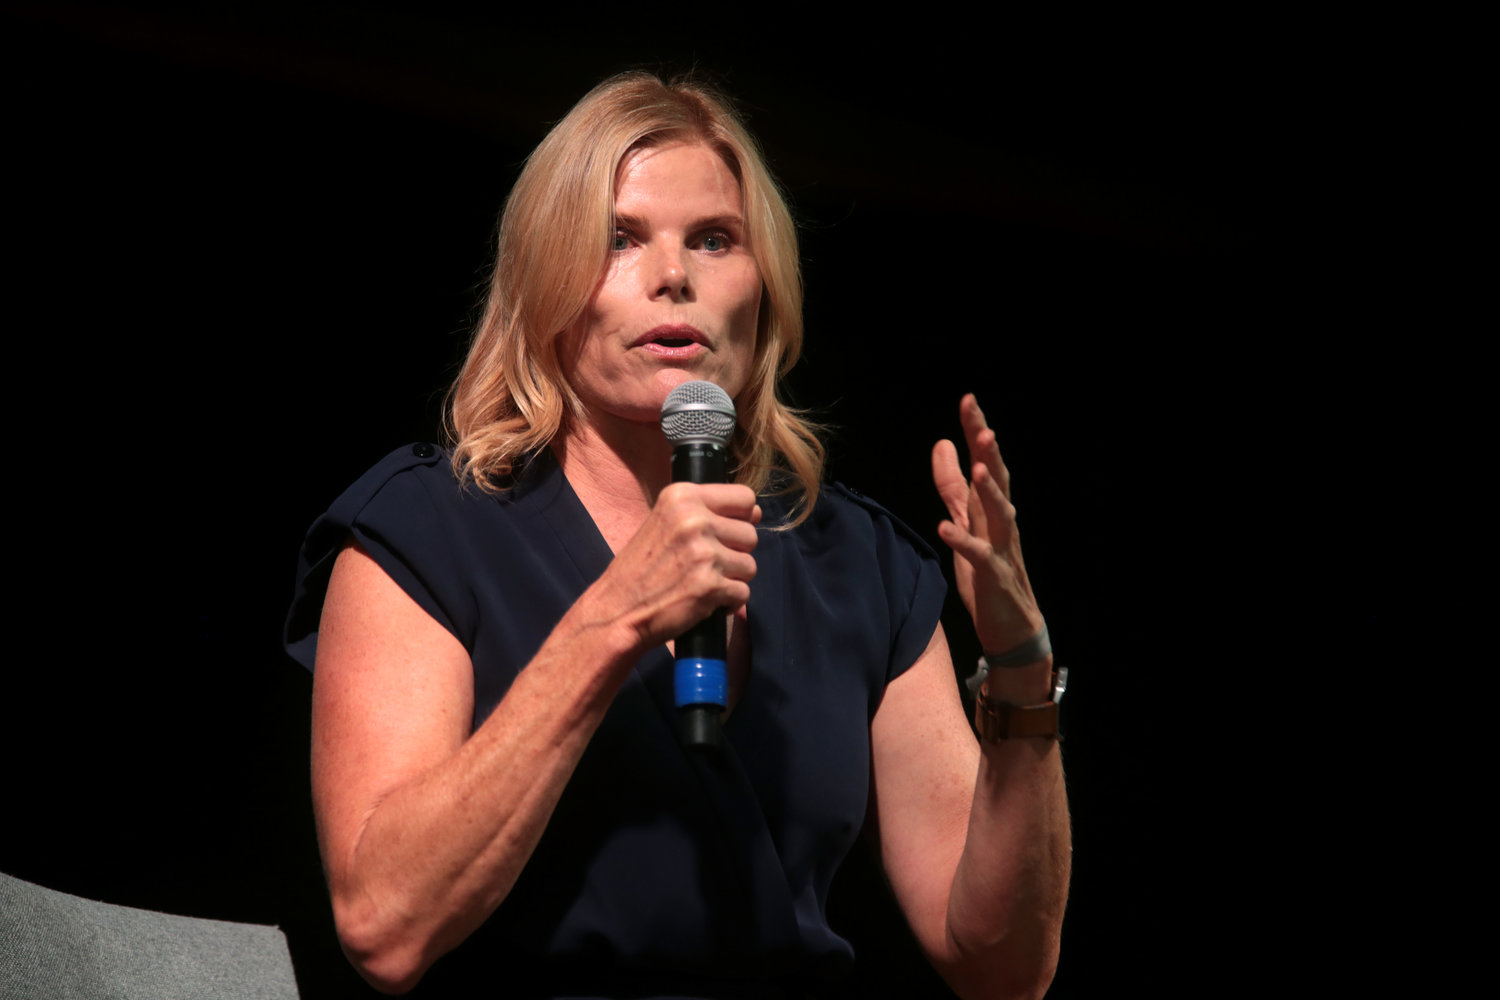 Actress Mariel Hemingway, who is a mental health advocate, will be one of the speakers at the Women’s Health Summit, which is free.